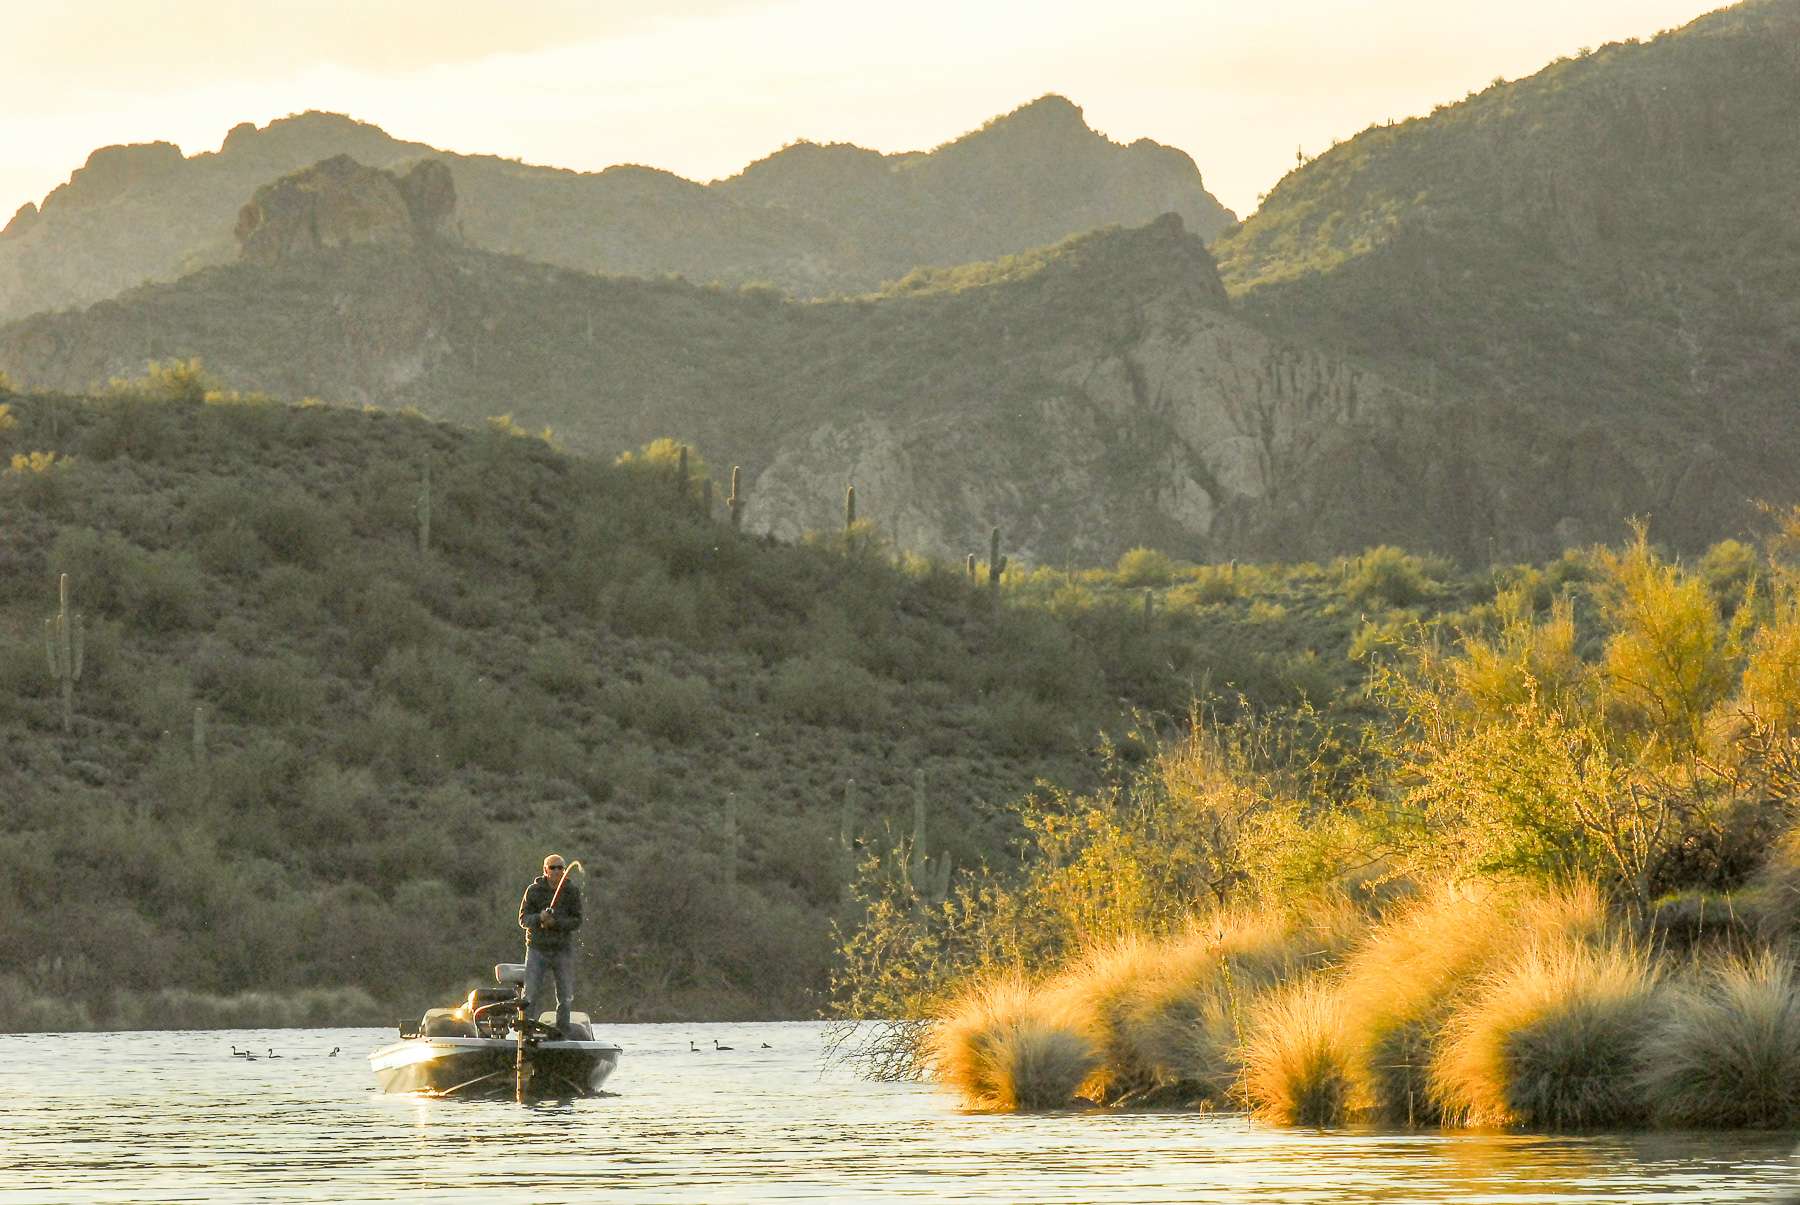 <h4>5. Saguaro Lake, Arizona</h4> [1,264 acres] The bass fishing at this Salt River impoundment can be tough at times, but when theyâre biting, youâll be glad you made the trip. Saguaro is known for quality before quantity, with the size of the largemouth steadily increasing over the past several years. And it doesnât look like that trend is ready to peak. Big bass at an April Midweek Bass Anglers team tournament weighed a whopping 9.35 pounds. It took 23.45 to win that event.